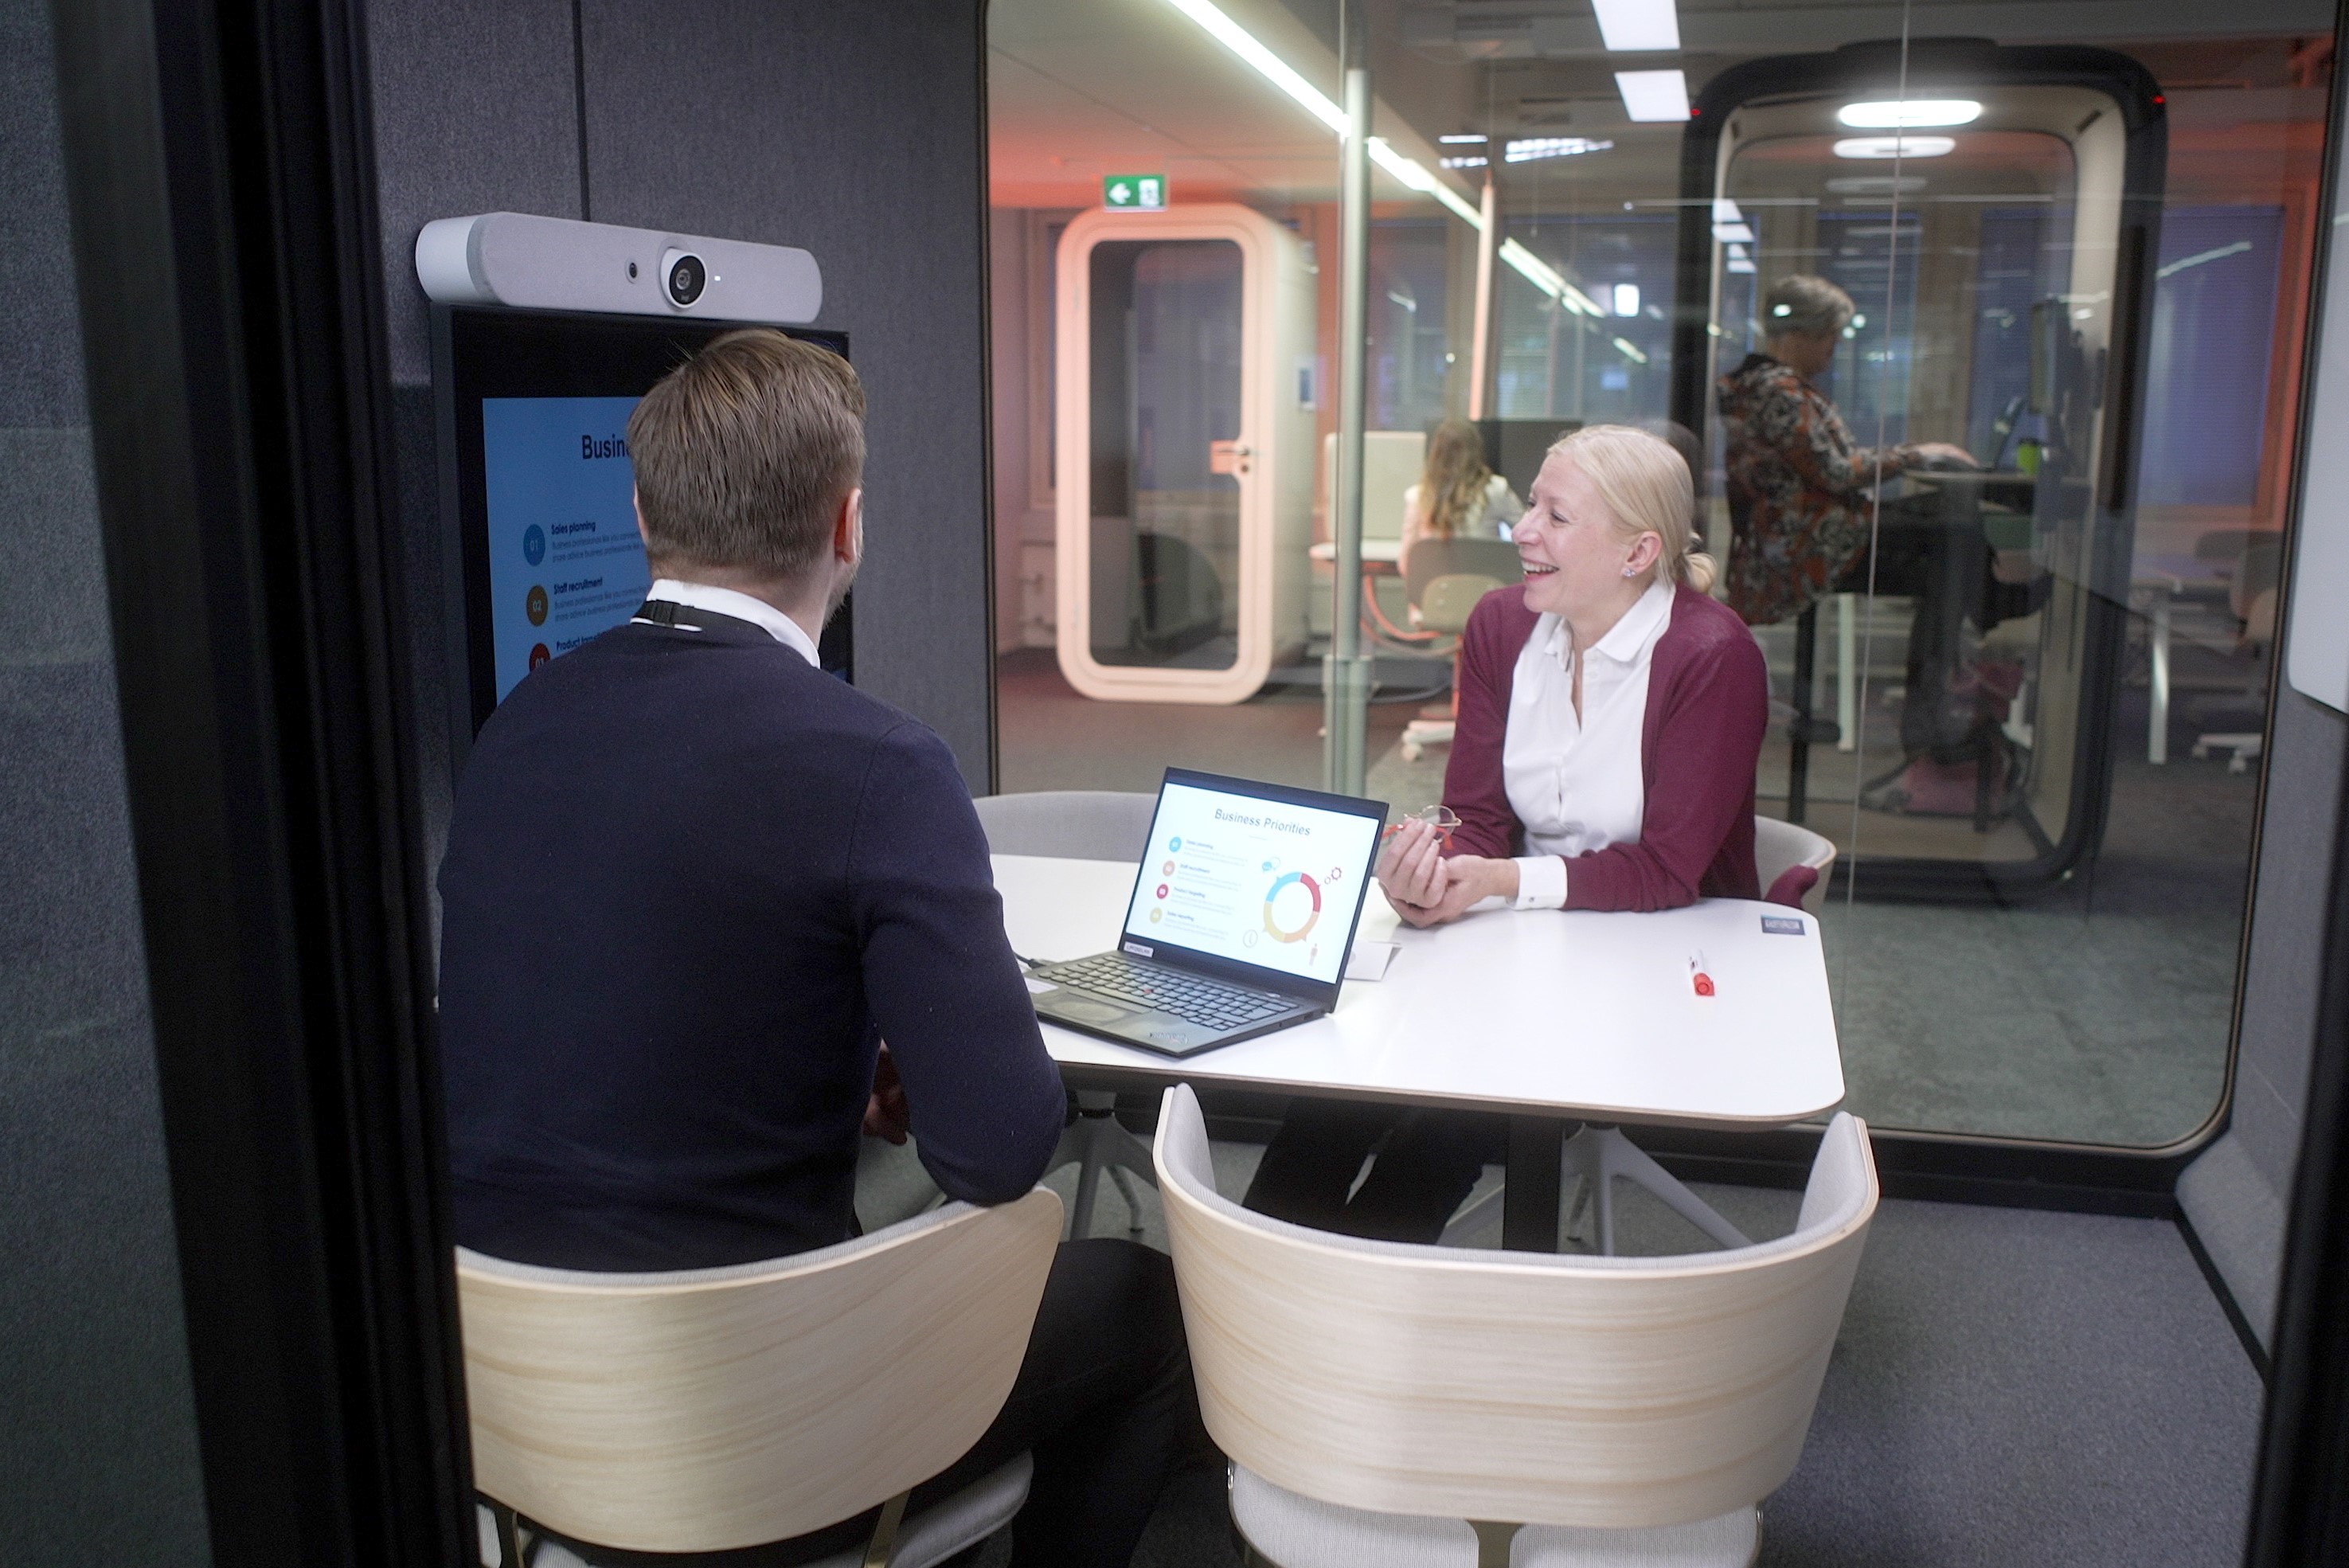 Elisa Videra helps you modernize your meeting spaces with the latest collaboration technology